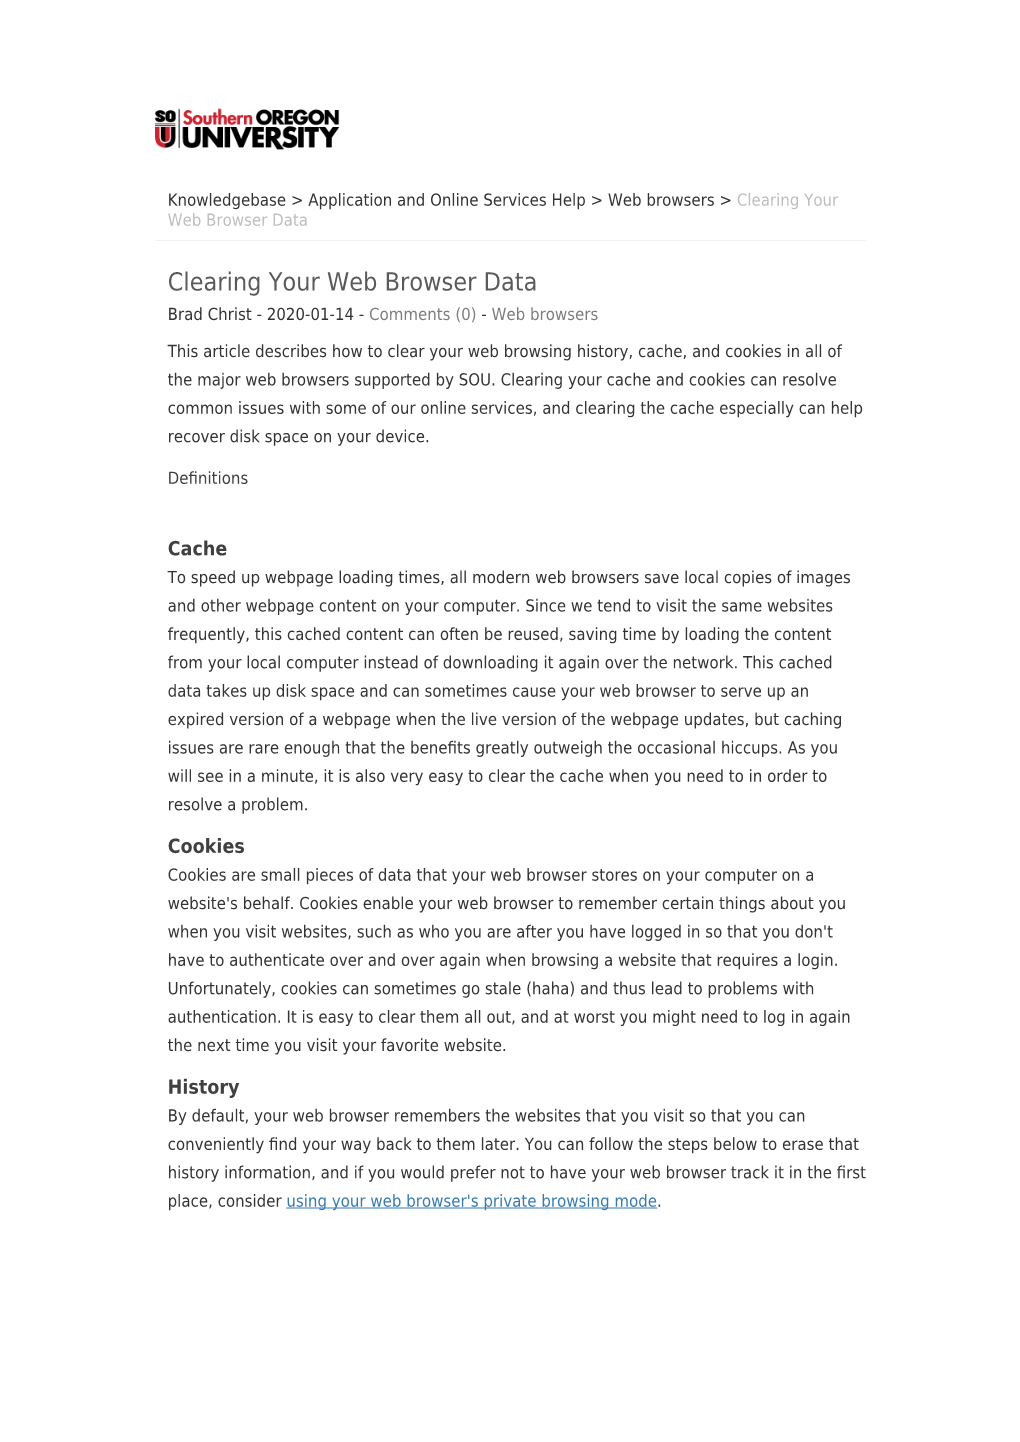 Clearing Your Web Browser Data